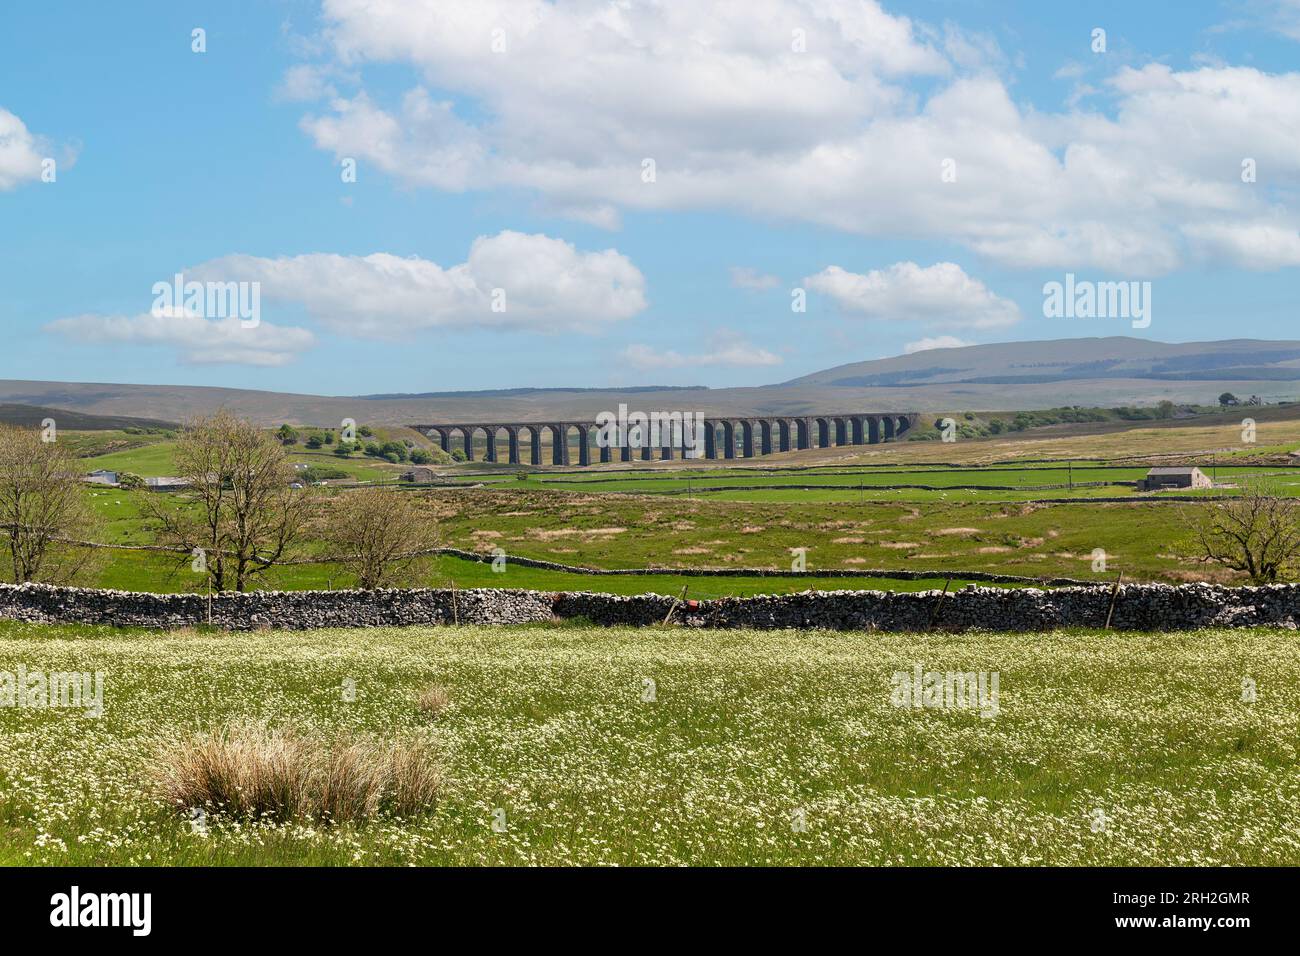 Ribblehead Viaduct in the North Yorkshire Dales. Well known landmark on the Carlisle Settle railway. Spectacular setting for the iconic structure. Stock Photo